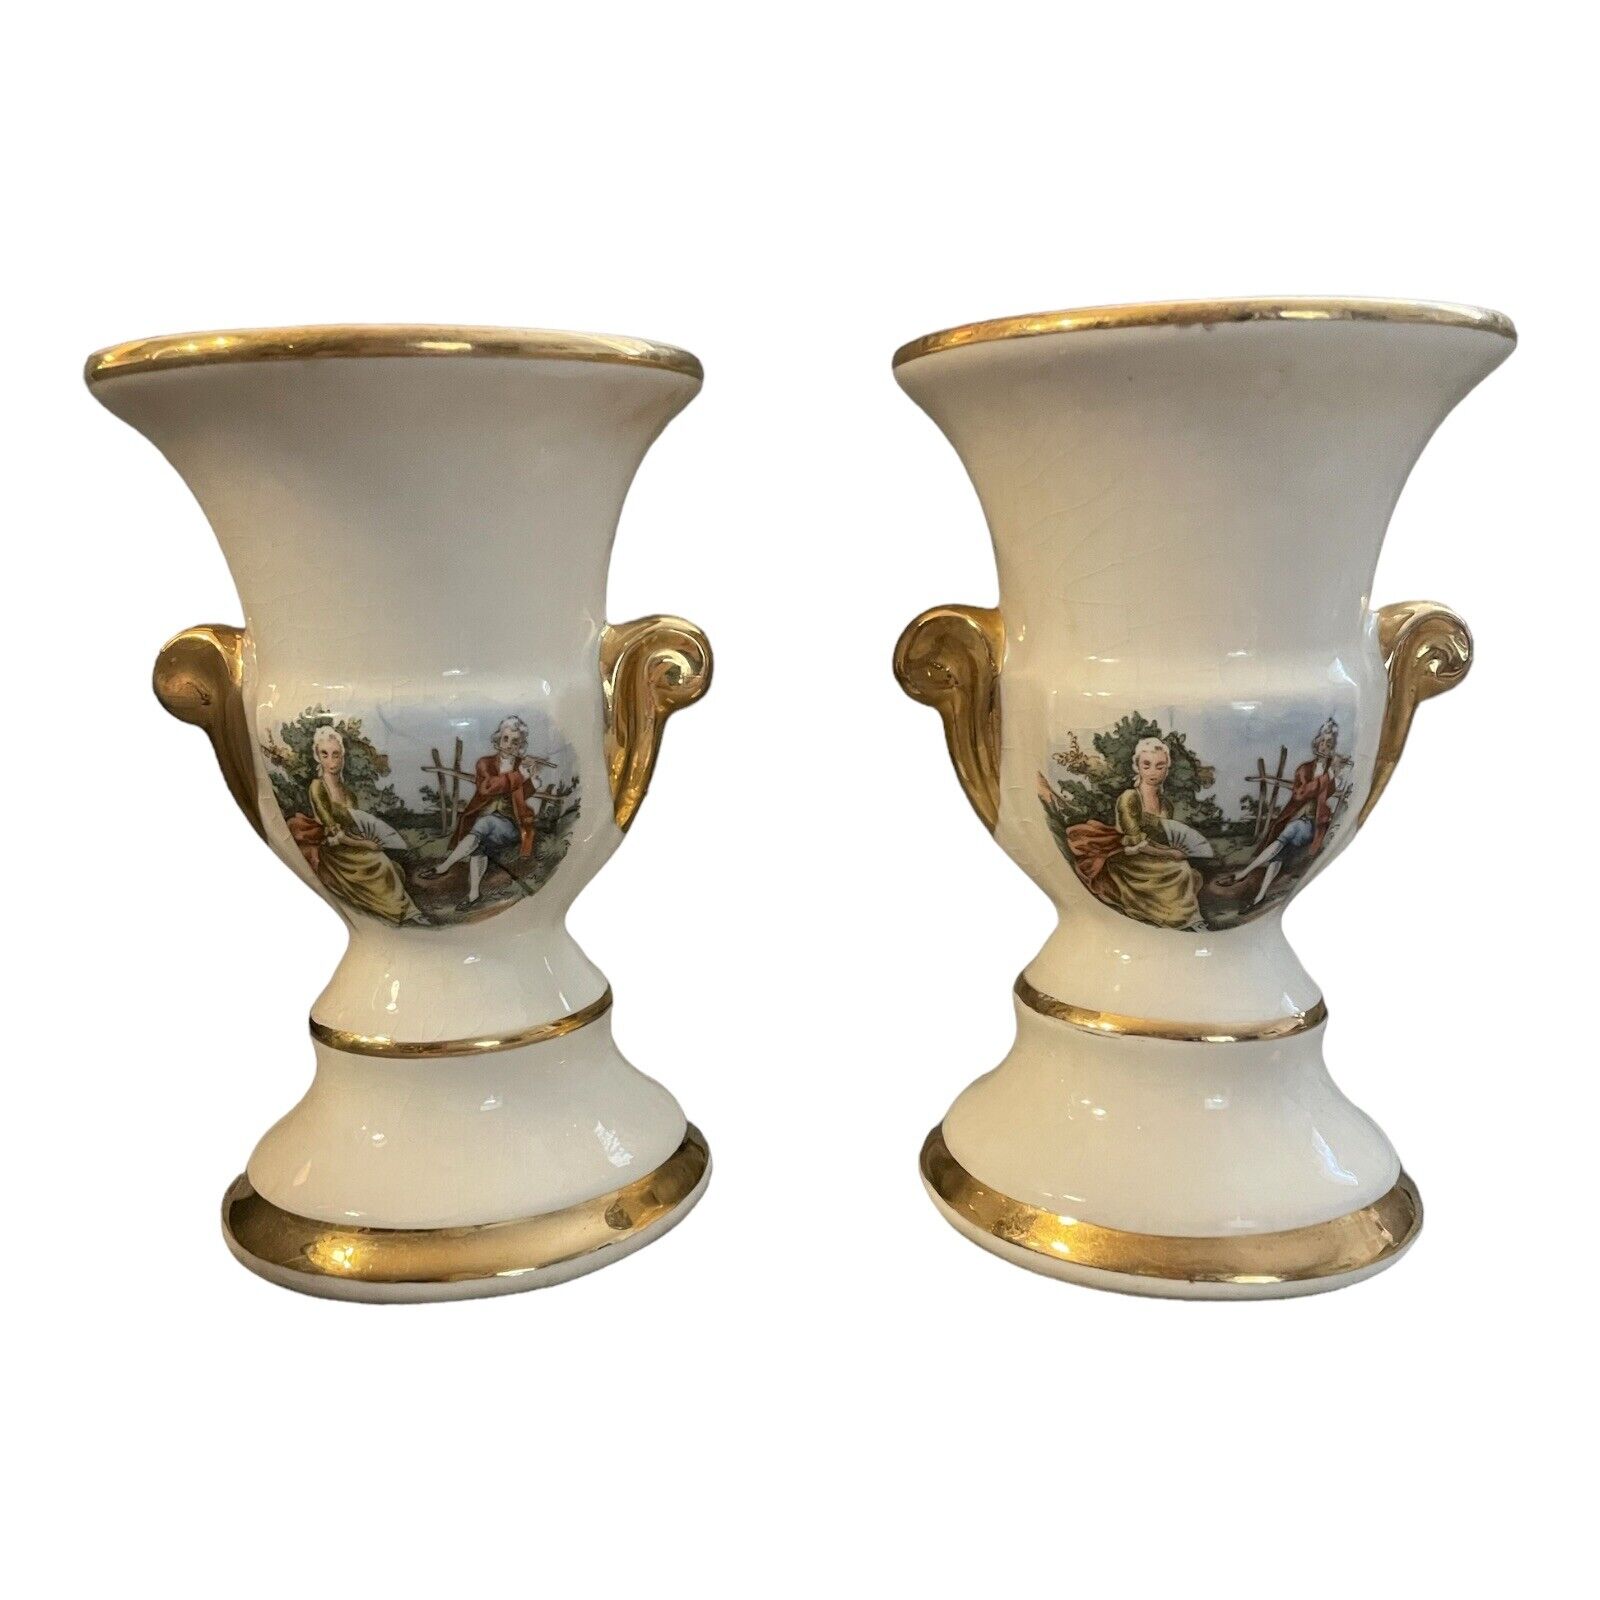 Vintage Victorian White Vases/Urns with Boucher Design Outlined in Gold set of 2